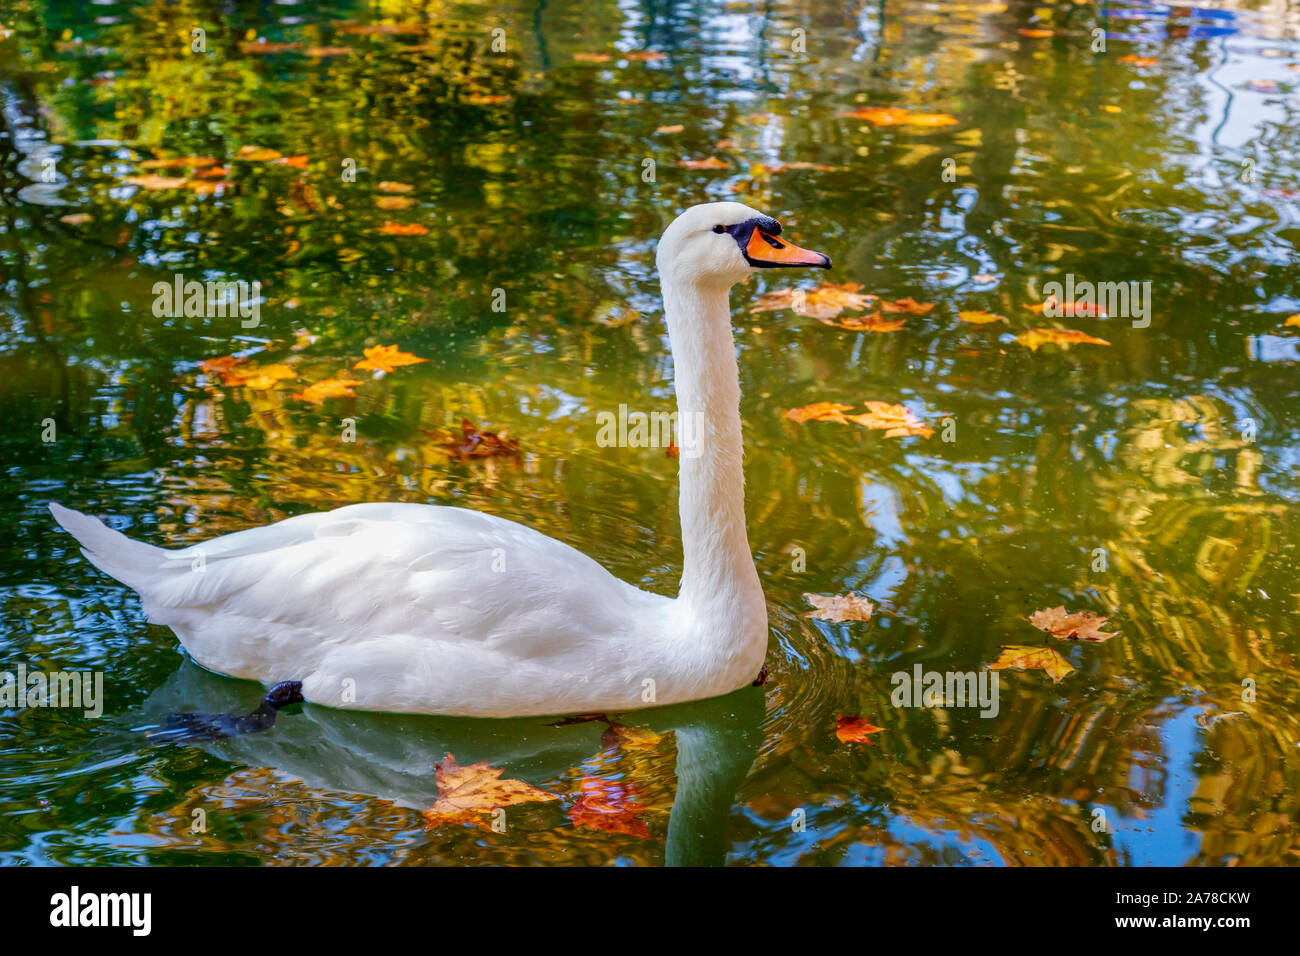 Autumn scene of a graceful swan swimming in a lake. Image Stock Photo